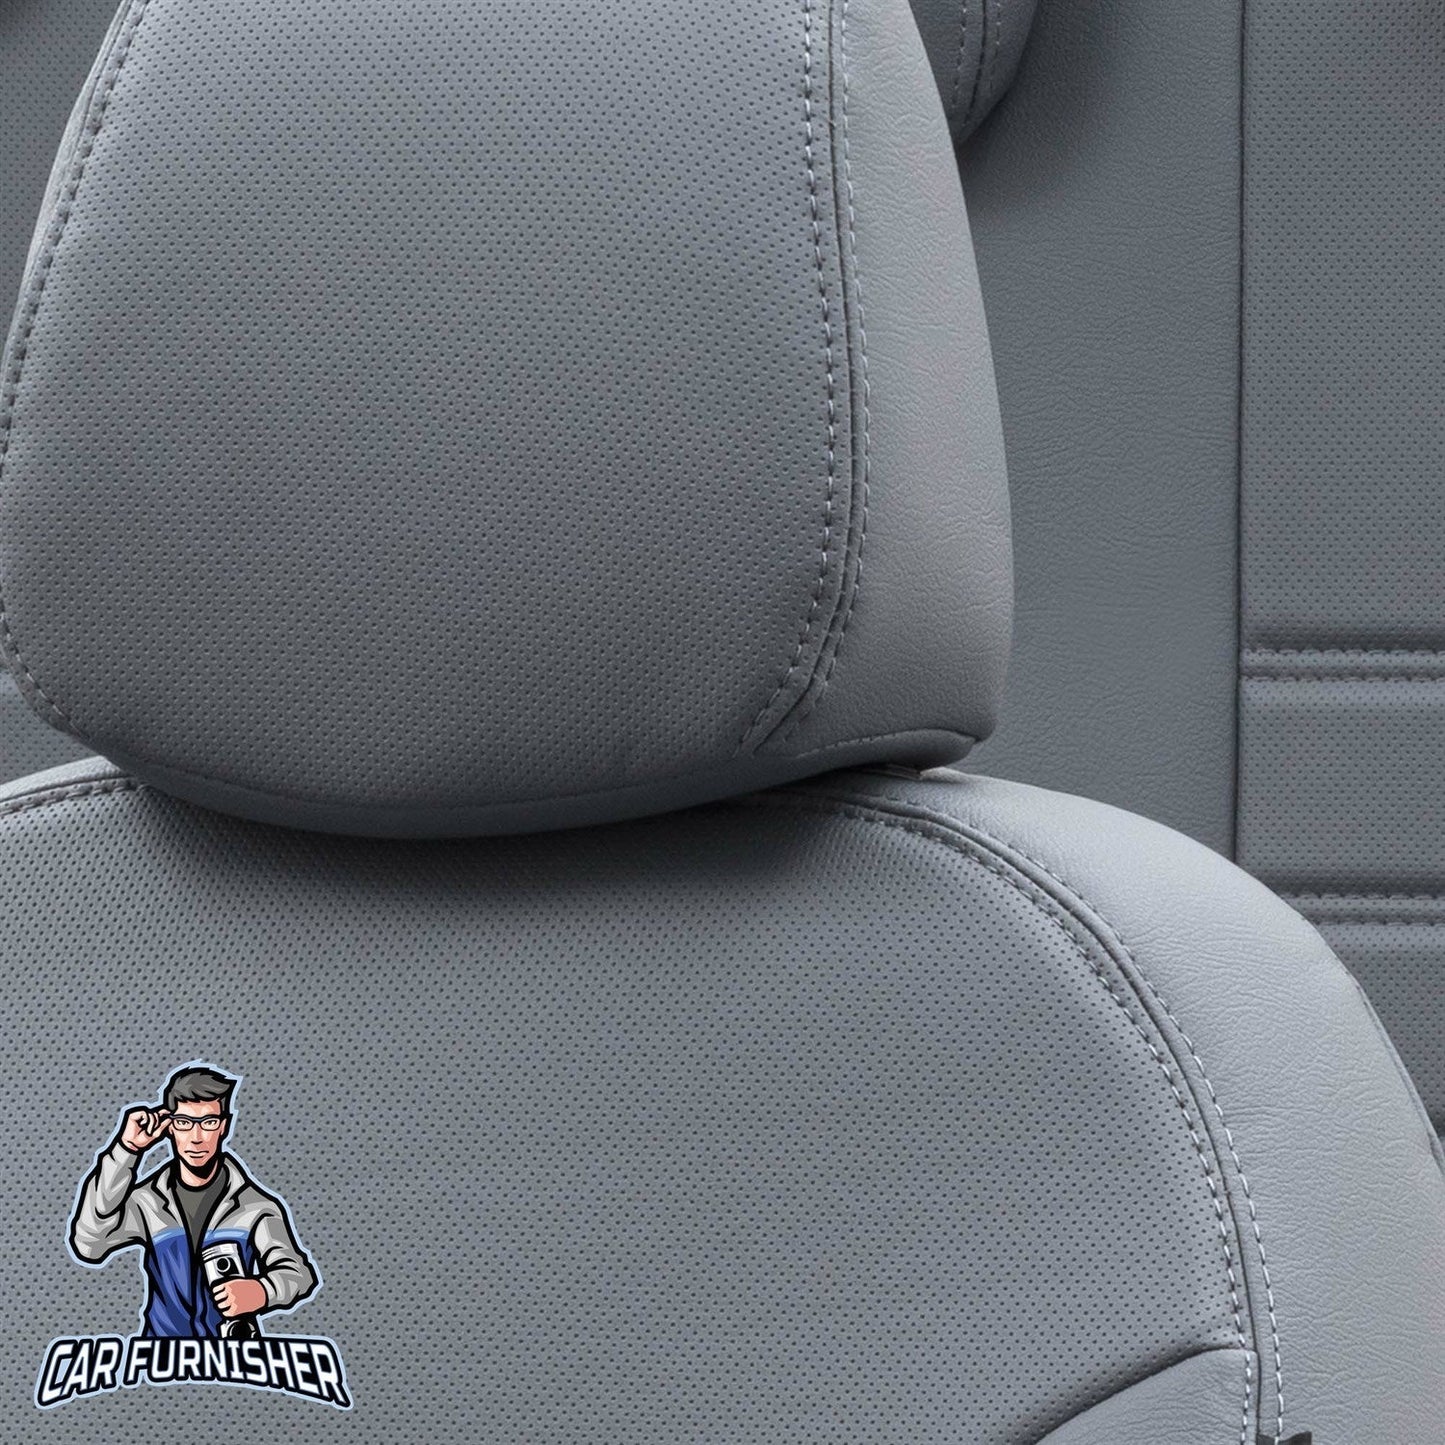 Opel Frontera Seat Cover Istanbul Leather Design Smoked Leather